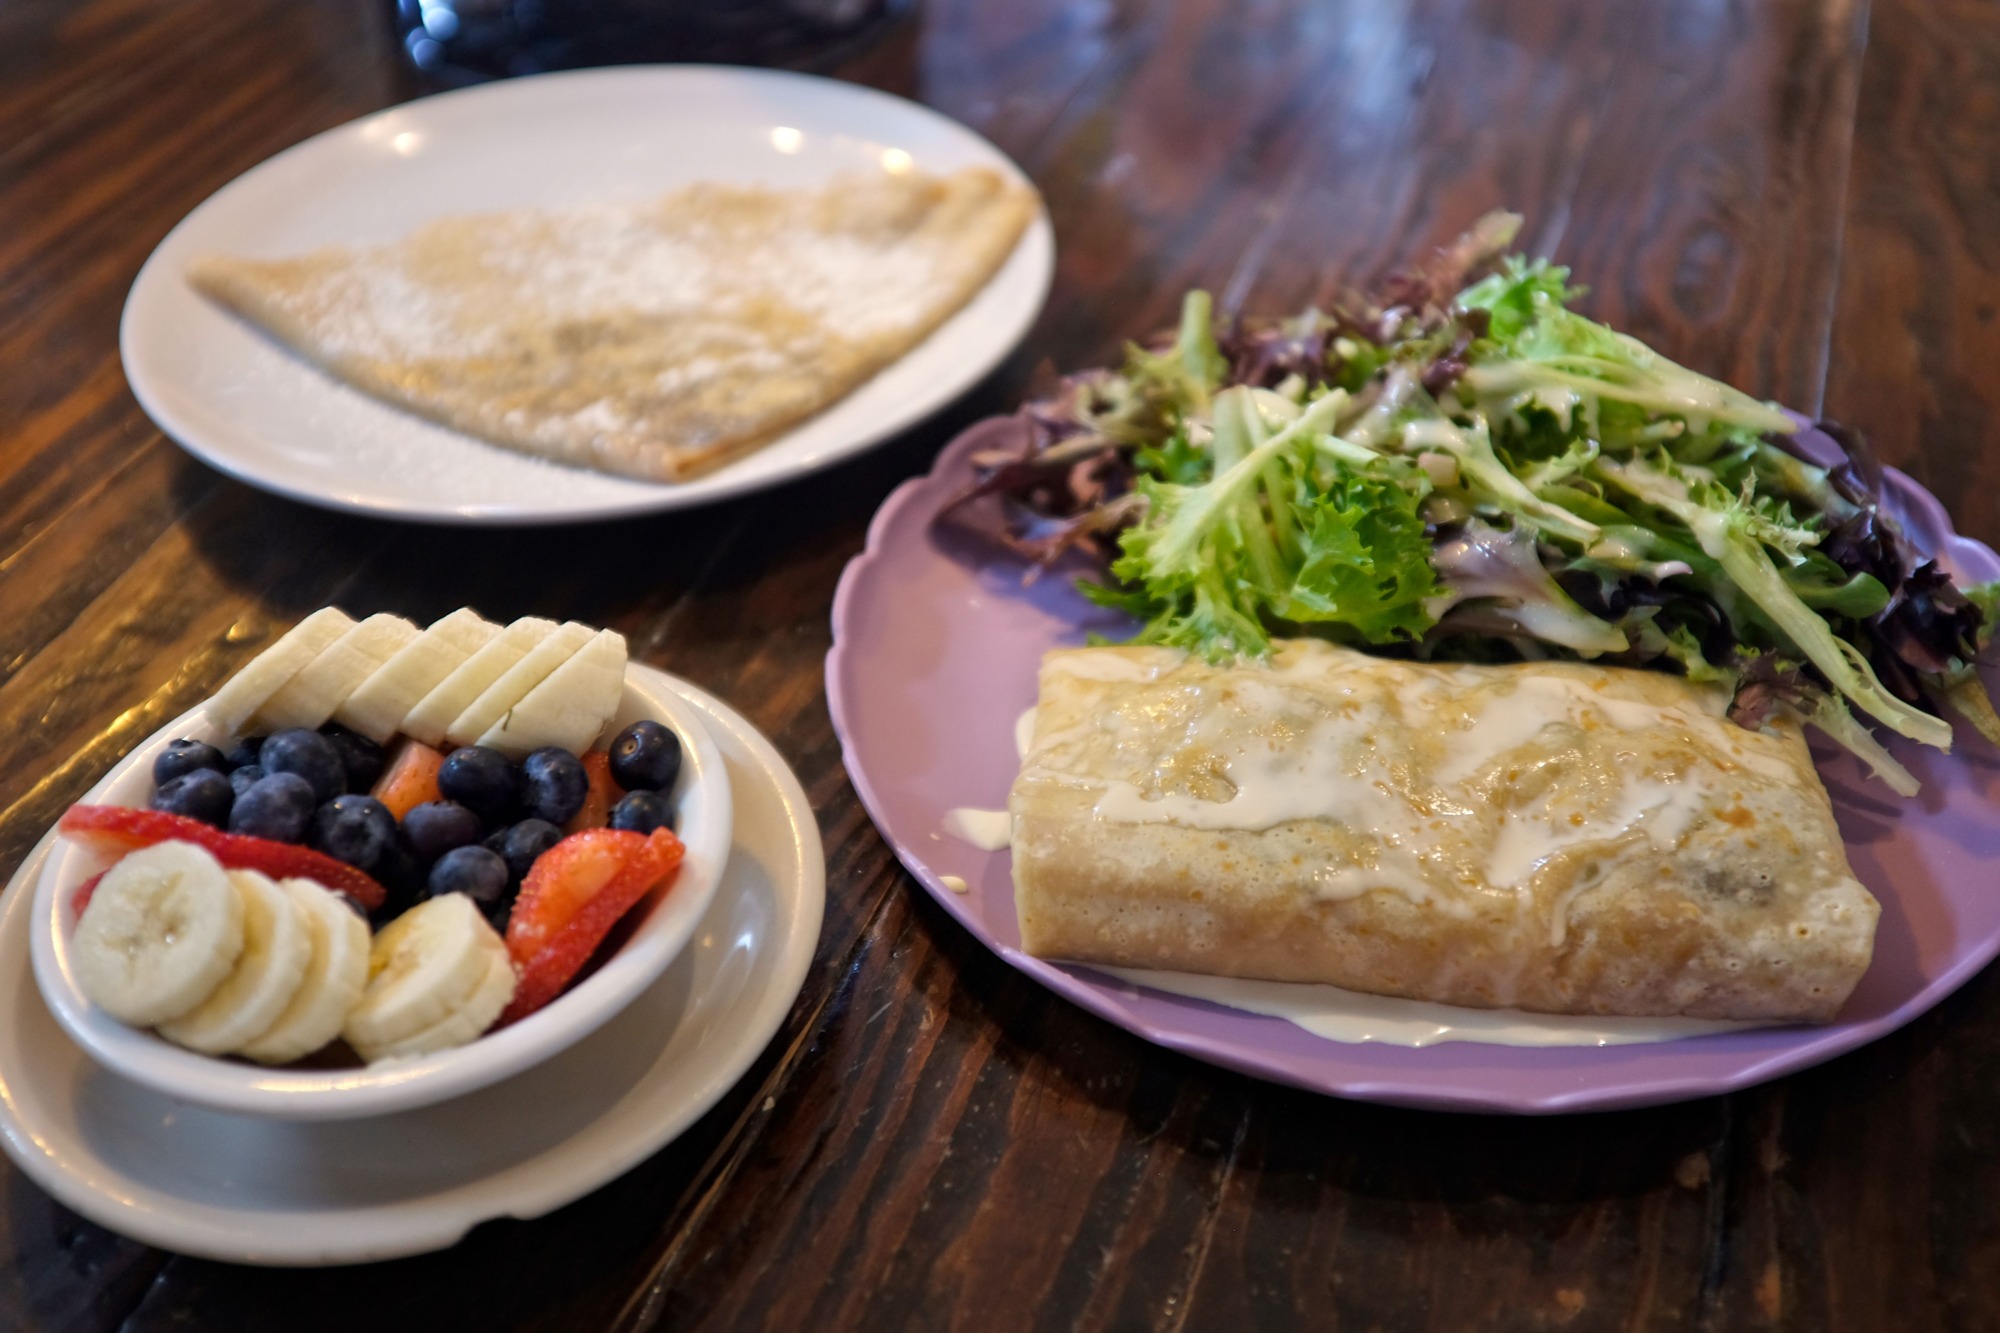 A sweet crepe, savory crepe, and a side of fruit